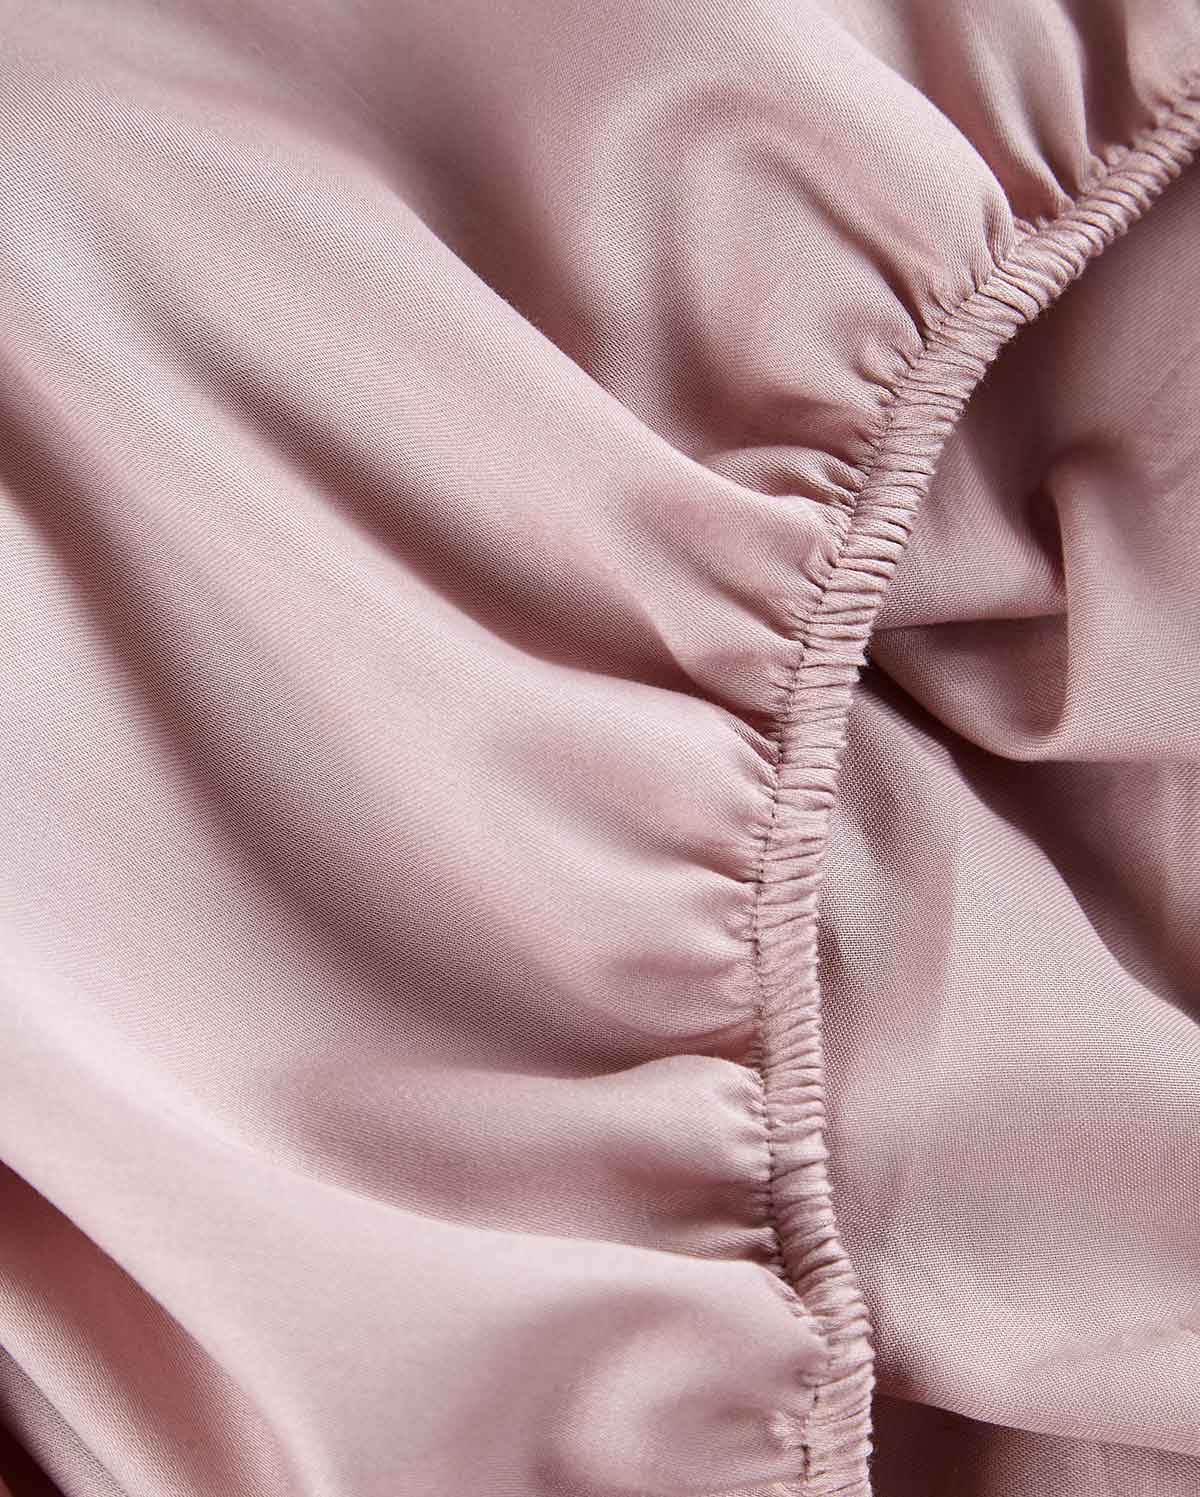 Lavish Sateen Fitted Sheet - Nude Pink